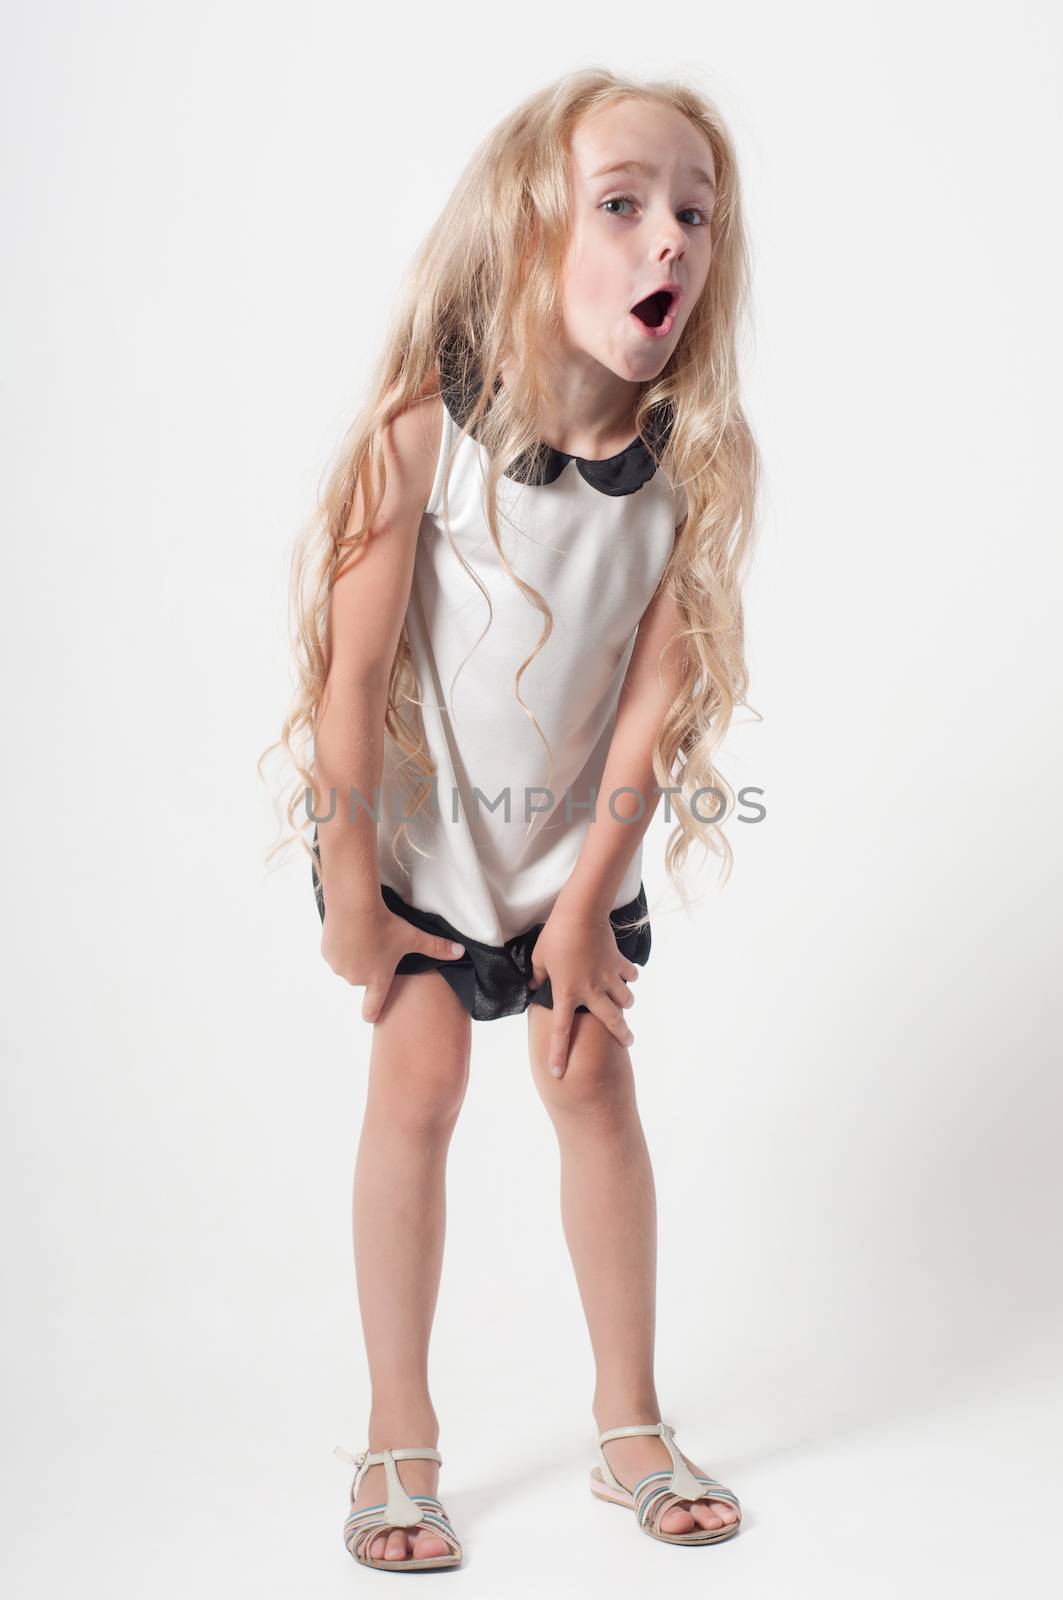 Little girl in white dress fooling around by anytka